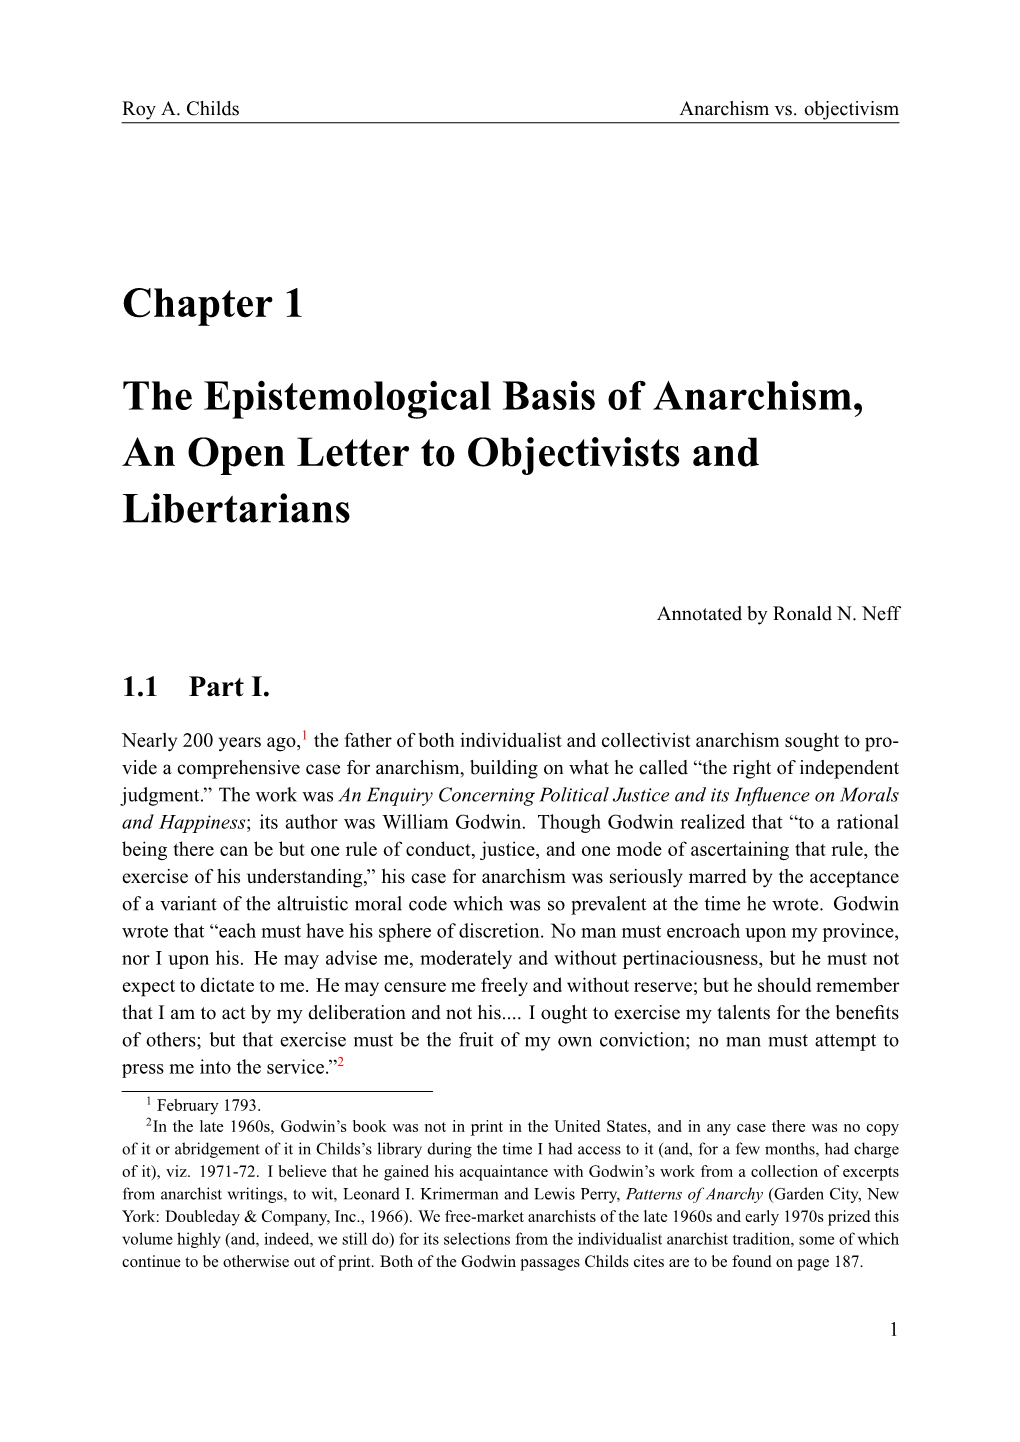 Chapter 1 the Epistemological Basis of Anarchism, an Open Letter To